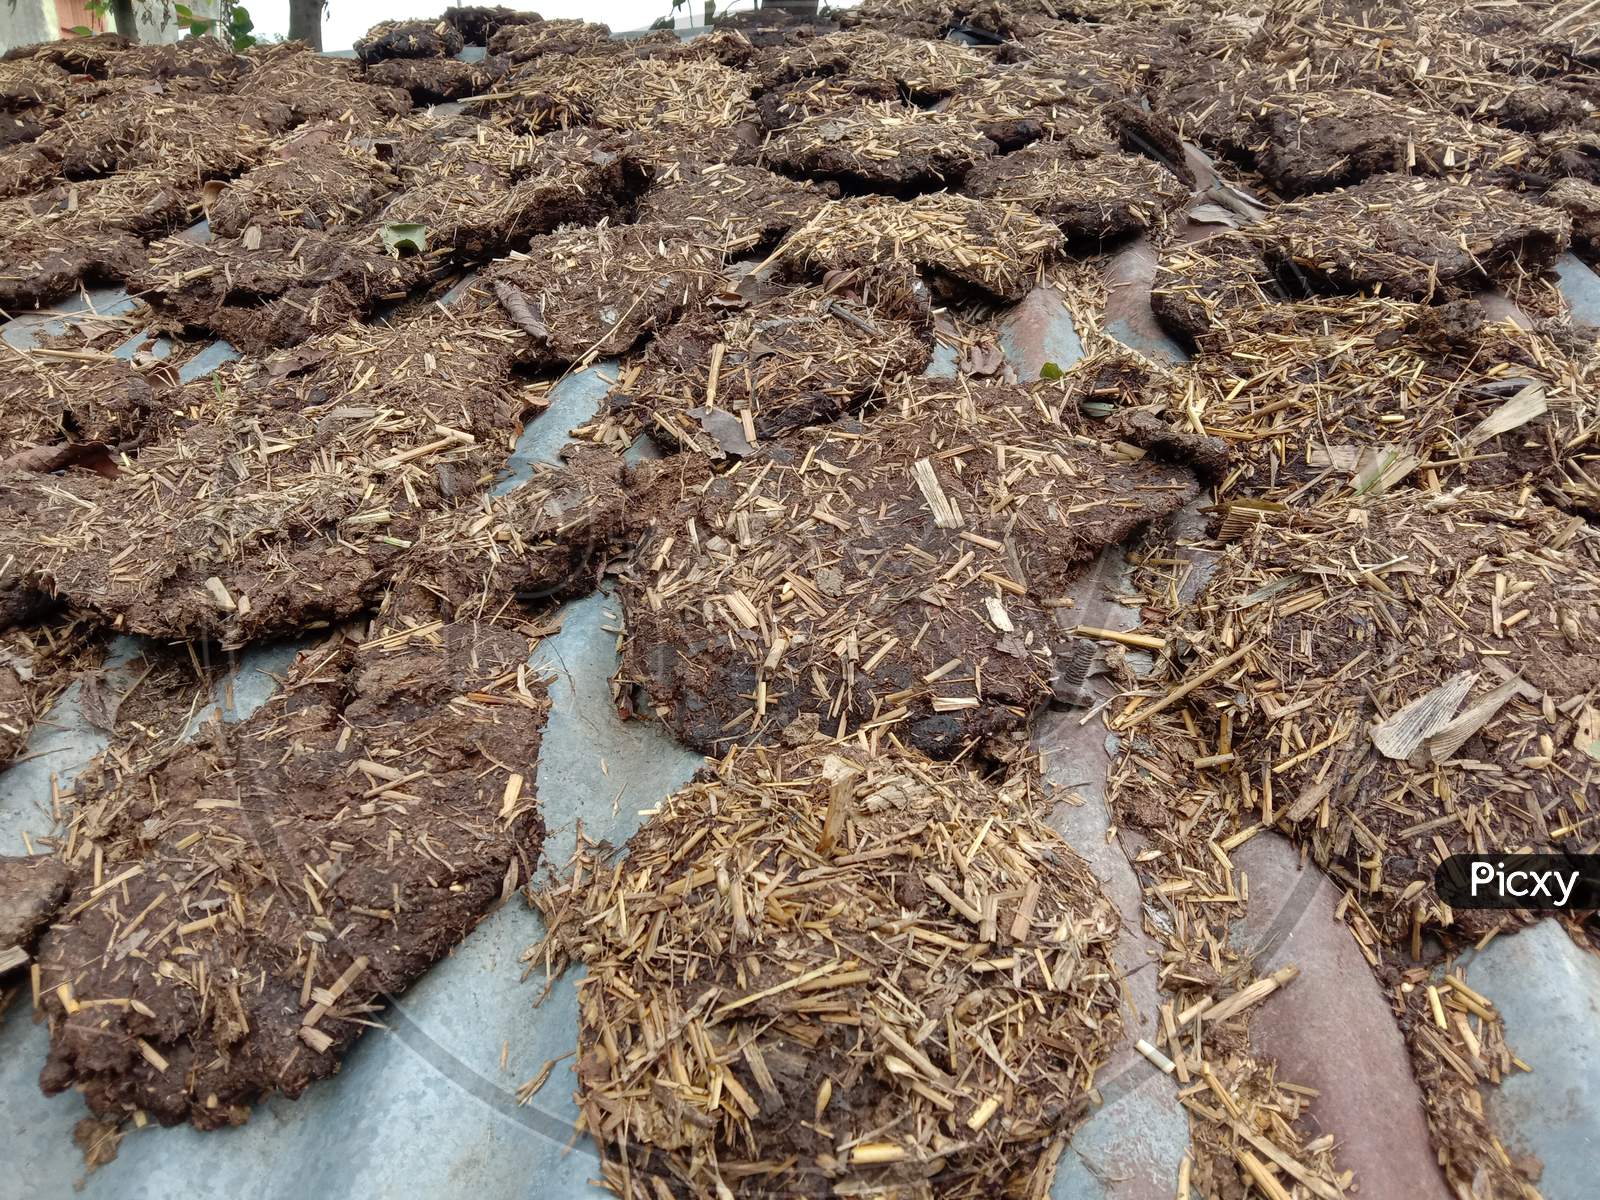 dung cakes production in an indian village.